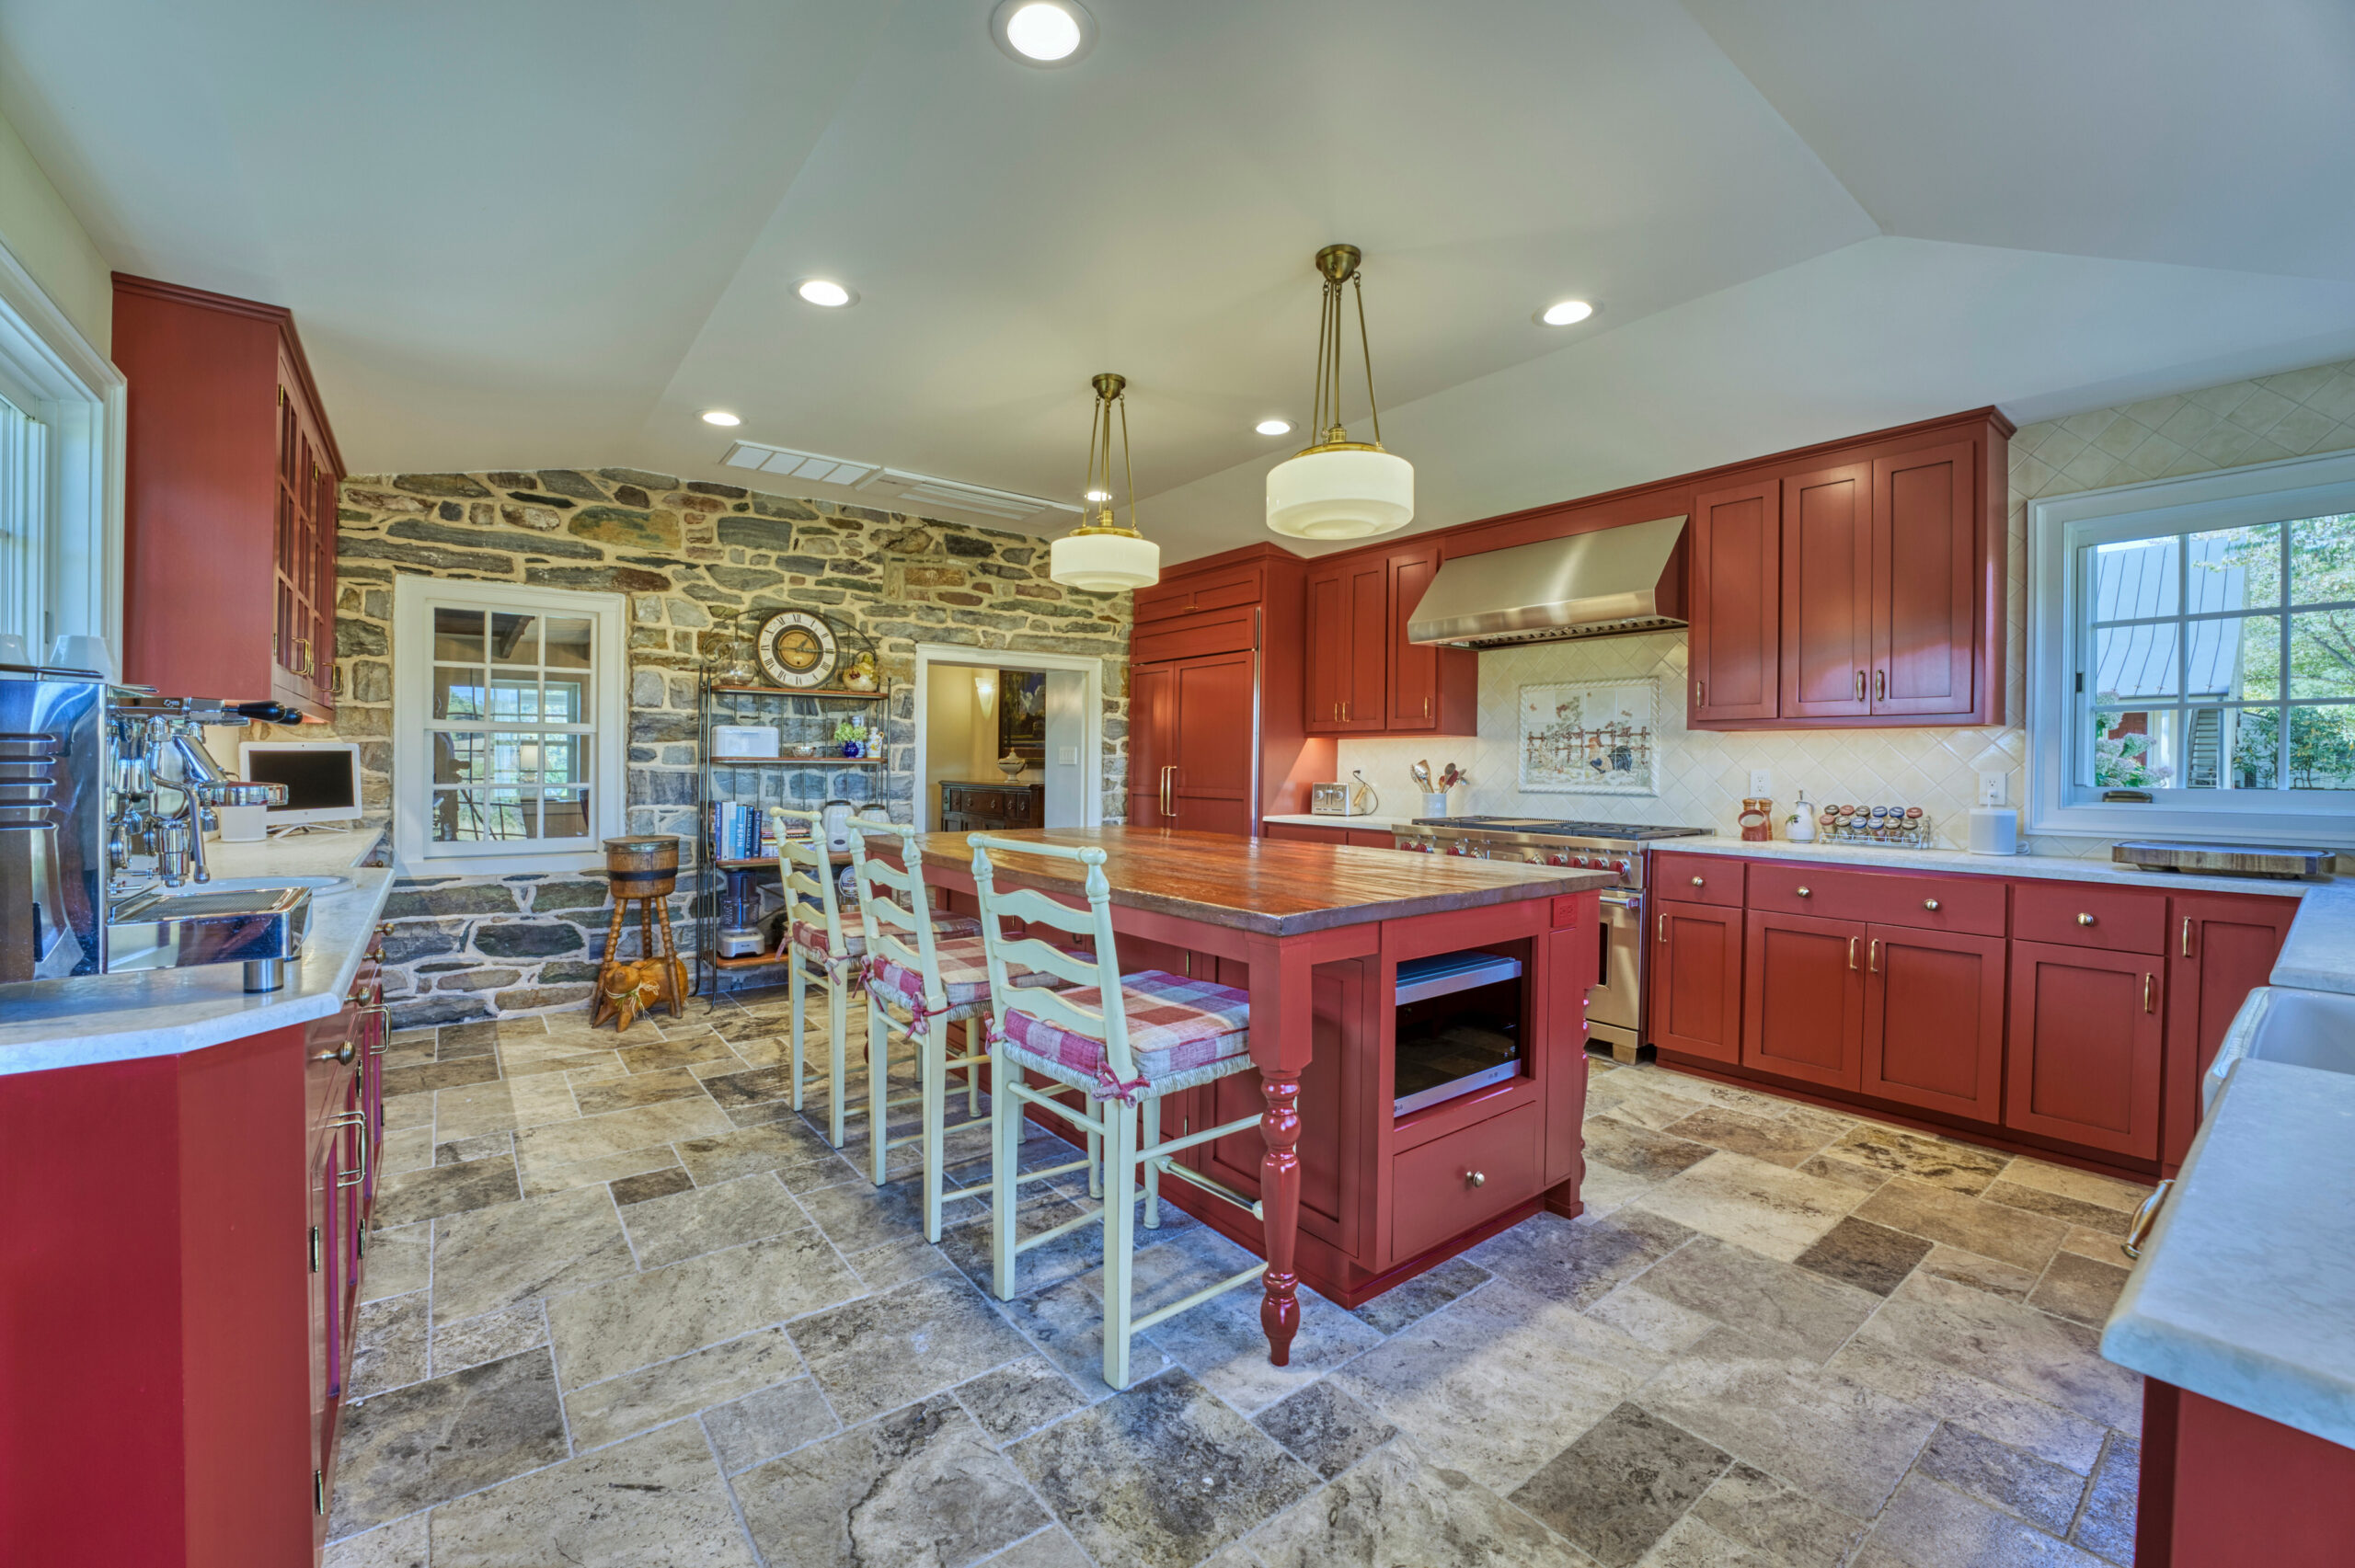 Professional interior photo of main house of Historic Hearthstone Manor: 35428 Appalachian Trail Rd, Round Hill, Virginia - showing large kitchen with stone accent wall, large center island with barstools, brick red and white color scheme